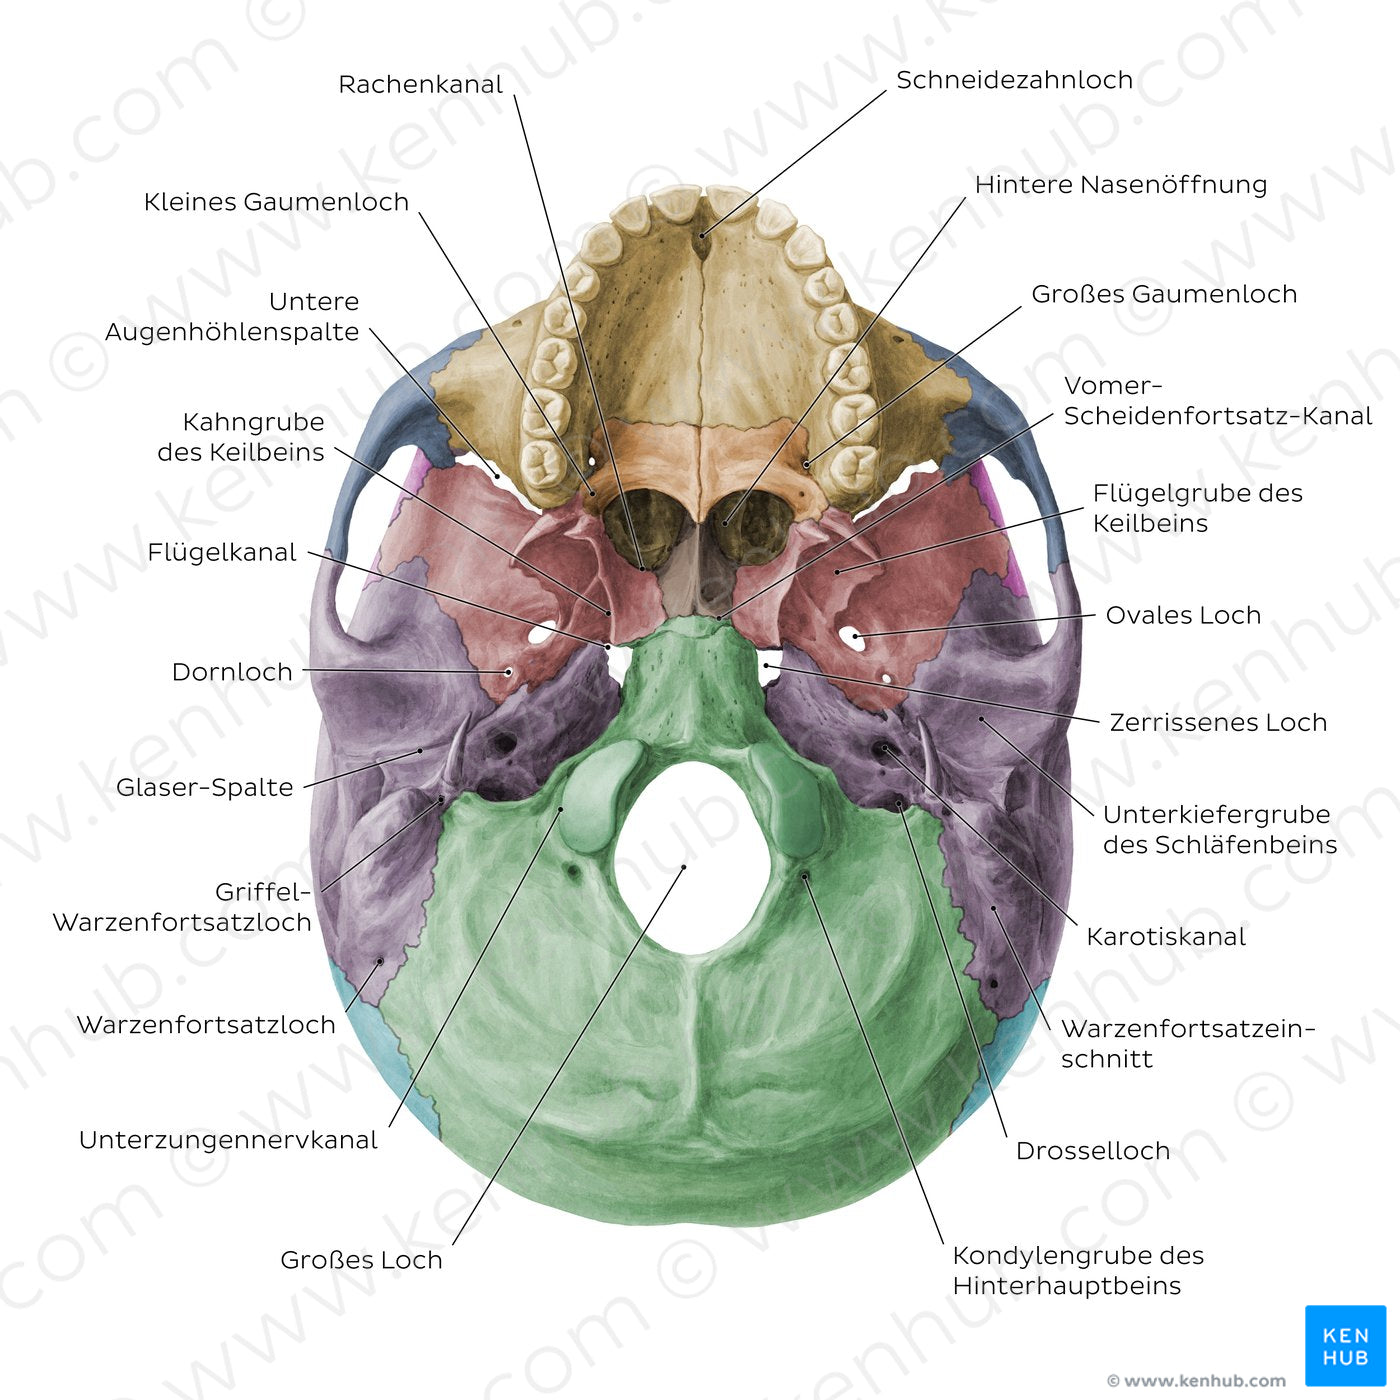 Inferior base of the skull - Foramina, fissures, and canals - Colored (German)